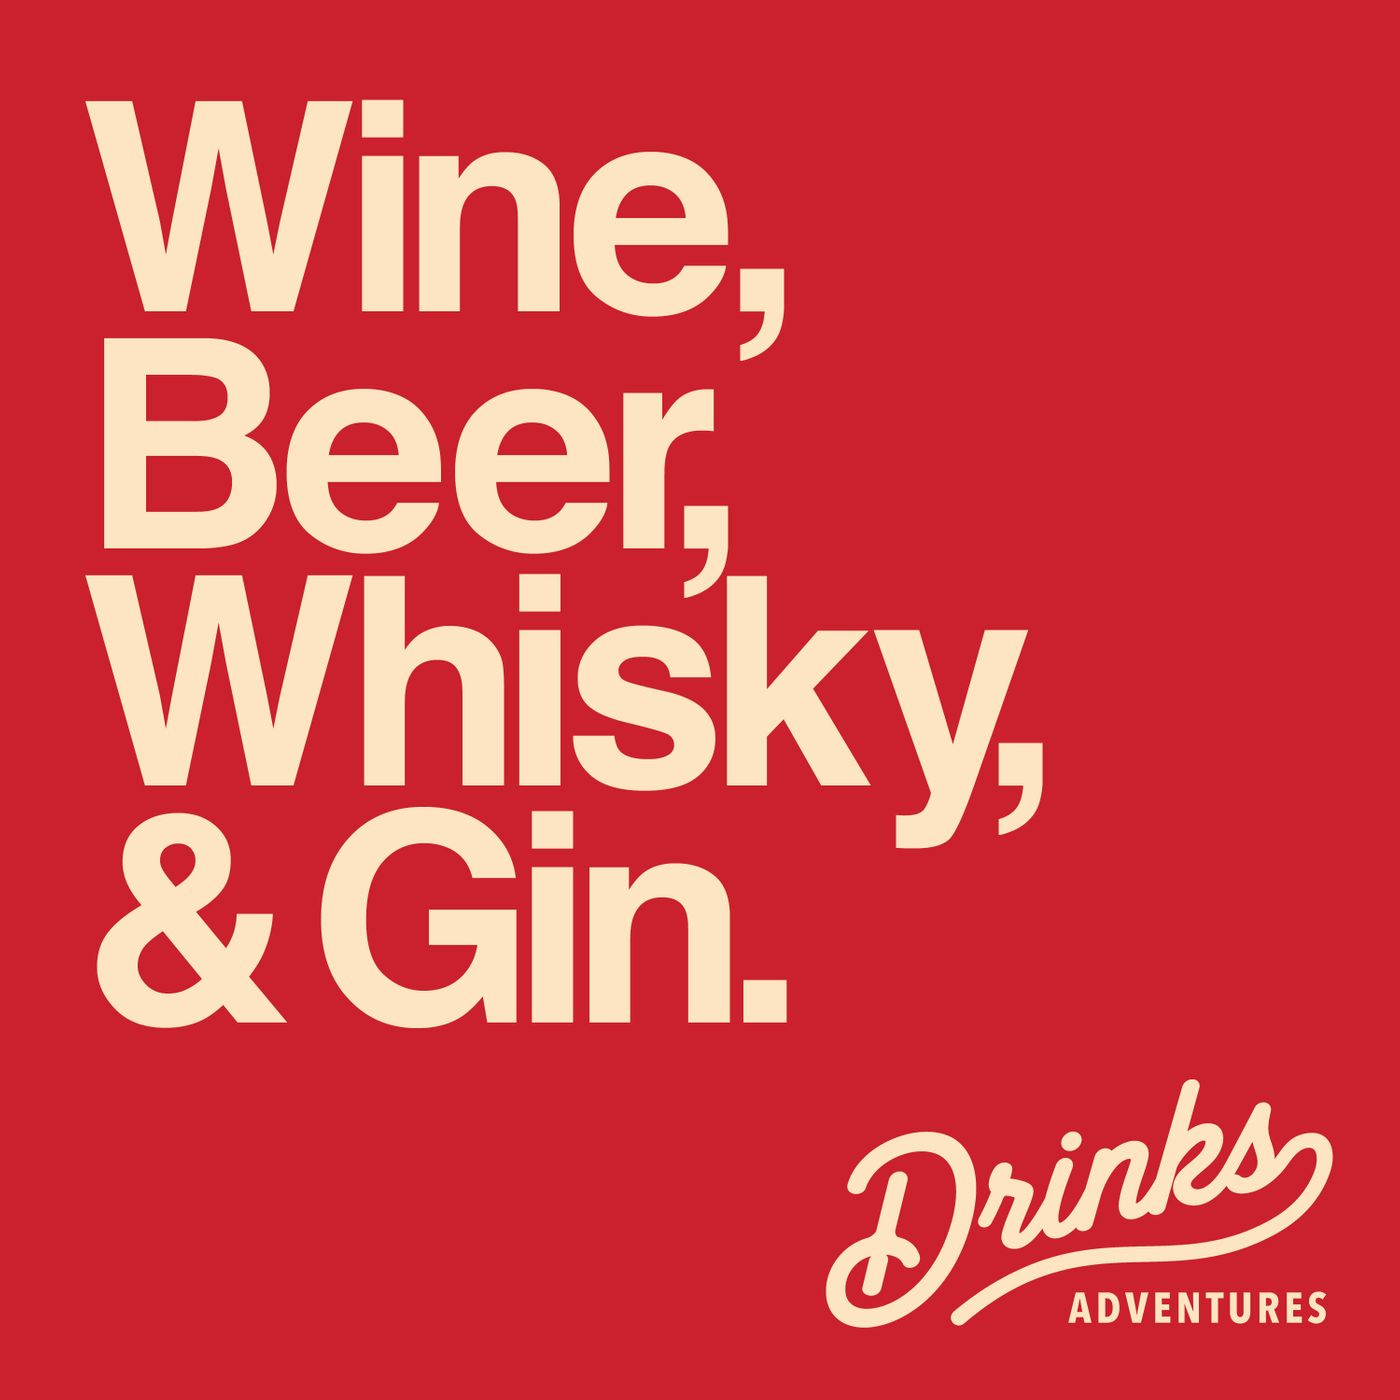 Artwork for podcast Drinks Adventures - Wine, beer, whisky, gin & more with James Atkinson